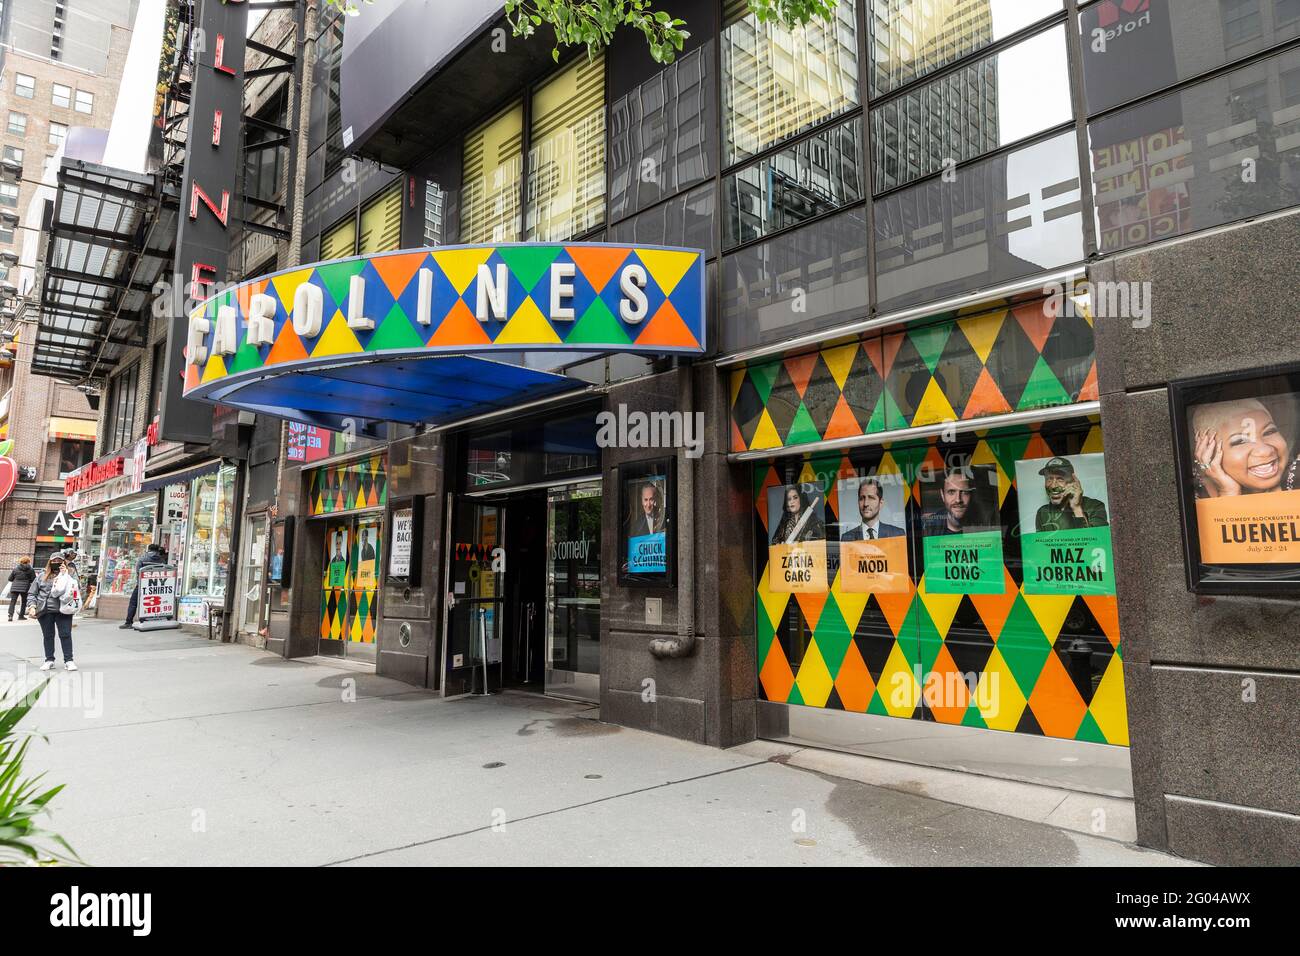 New York, NY - May 31, 2021: View of exterior of Carolines on Broadway comedy club during re-opening after pandemic ceremony Stock Photo